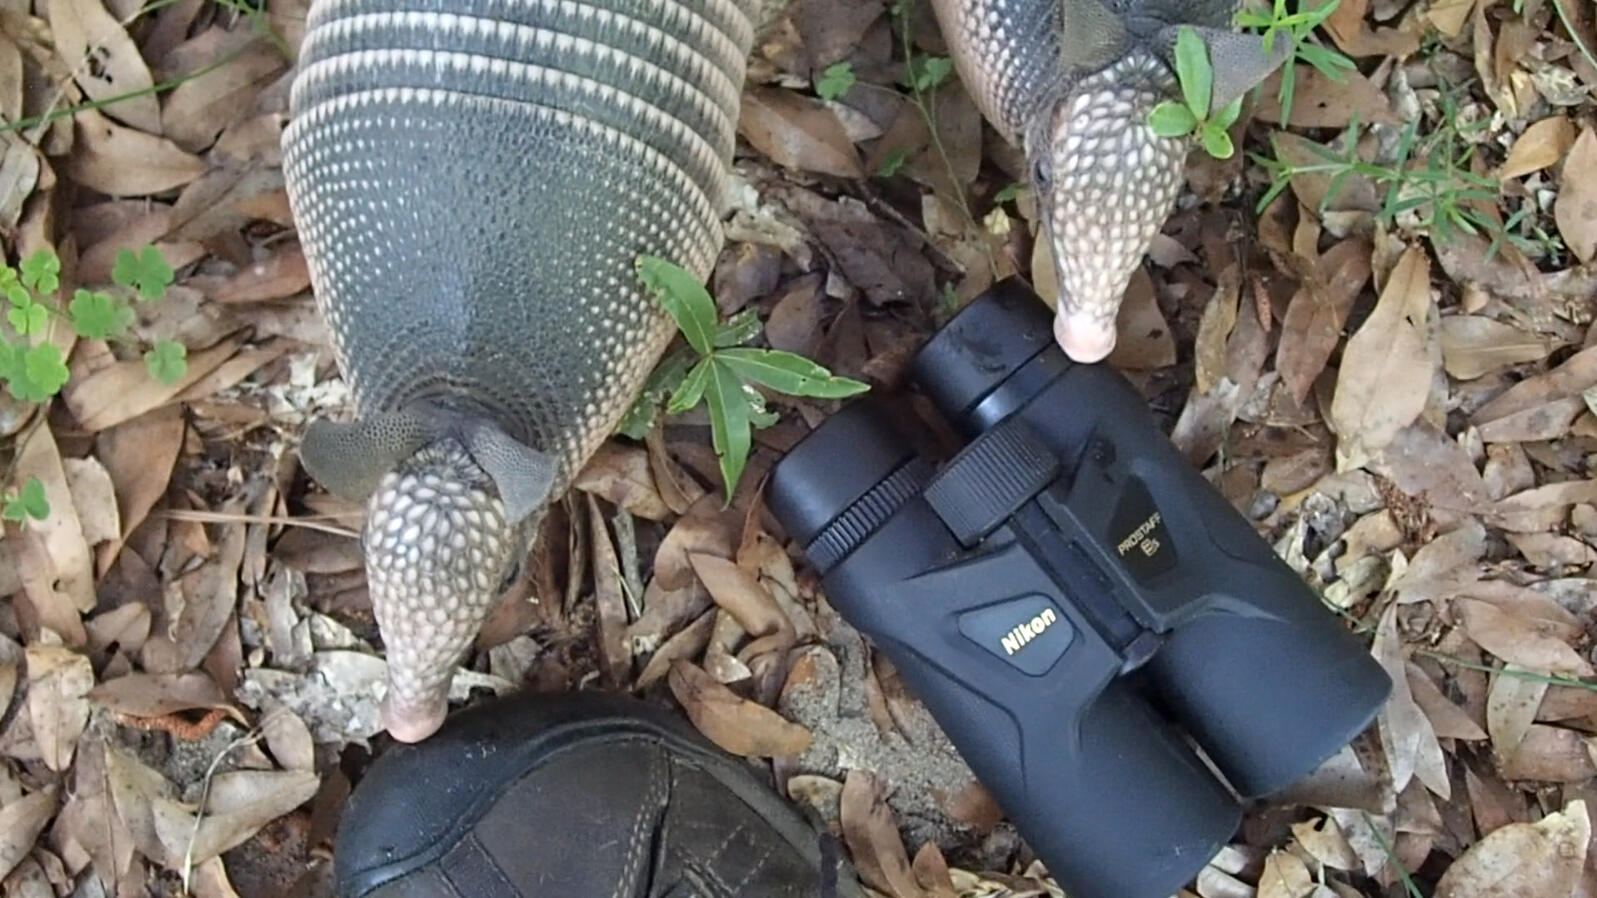 Two armadillos are inspecting (more like sniffing) a pair of binoculars and a shoe. Neither the binoculars nor the shoe are devoid of armadillo saliva.